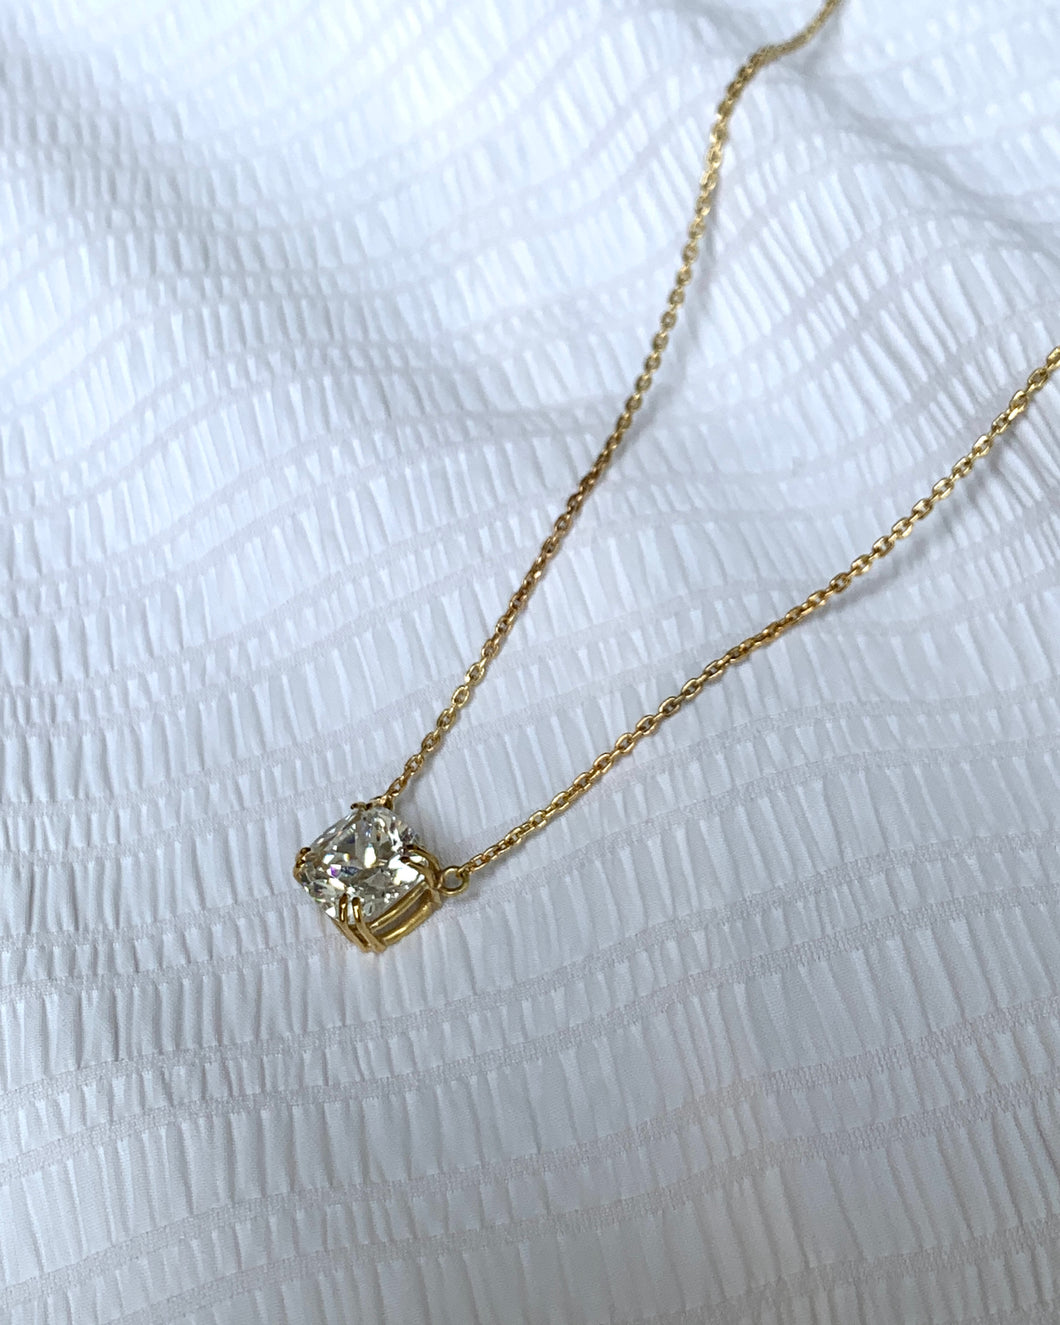 A beautifully set cushion-cut signity on a double prong open basket. Seems floating on an 18k gold classic chain.